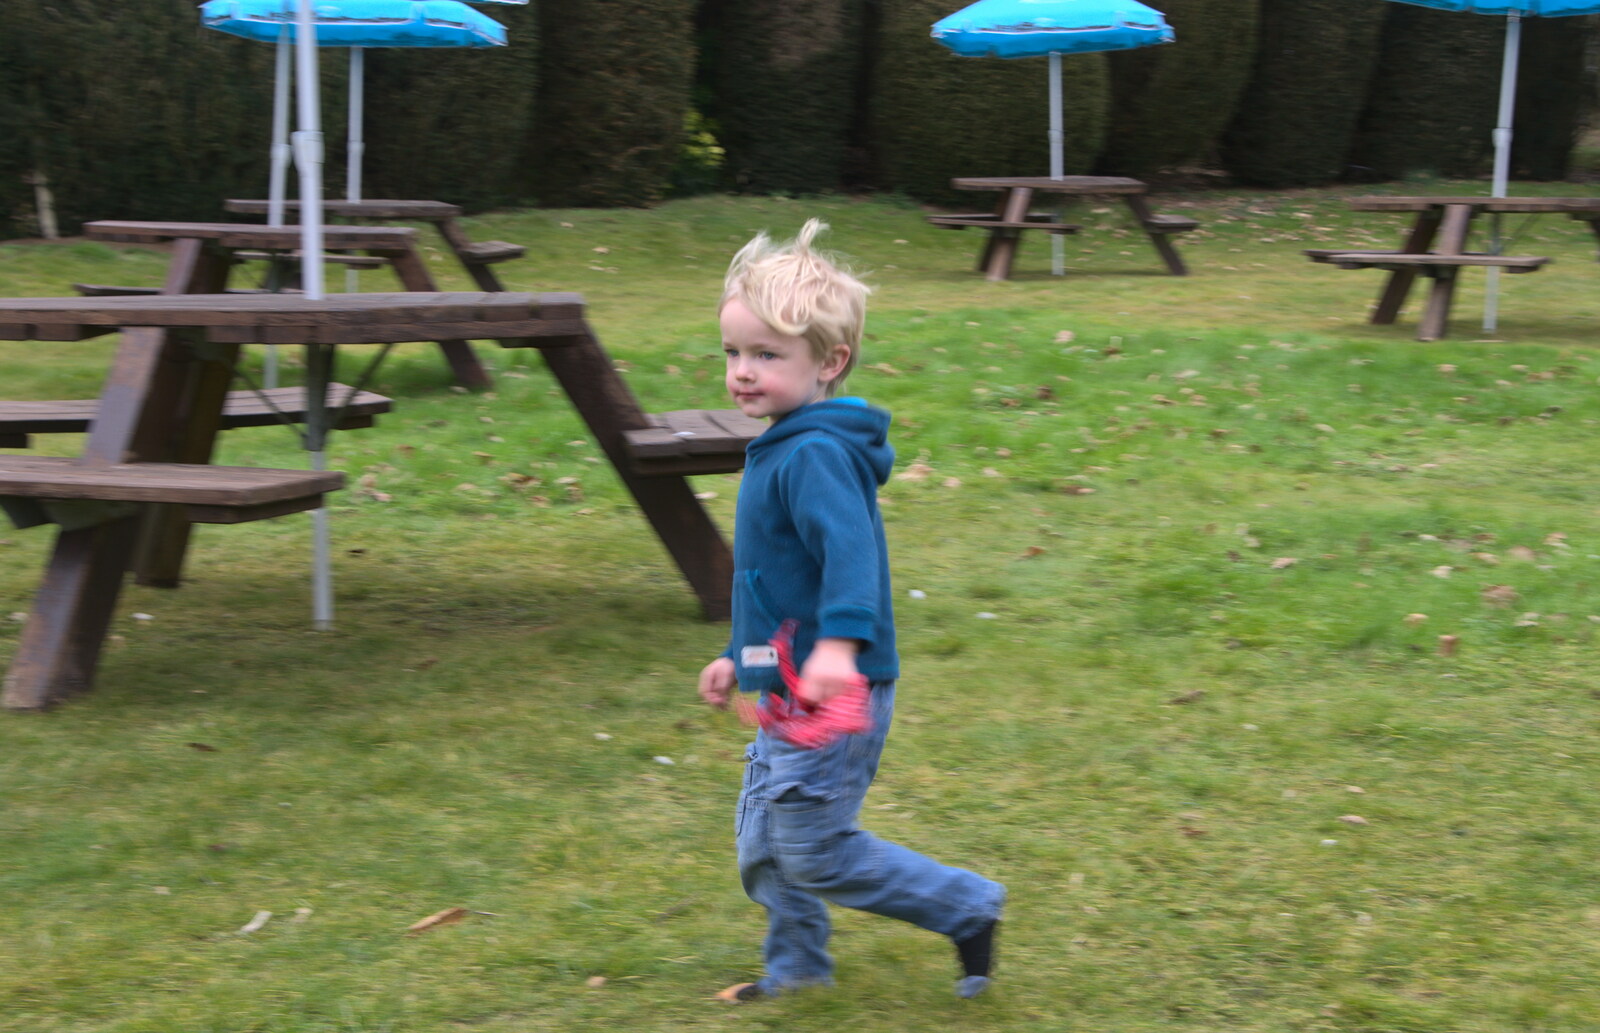 Harry runs around from A Crashed Car and Greenhouse Demolition, Brome, Suffolk - 20th March 2015